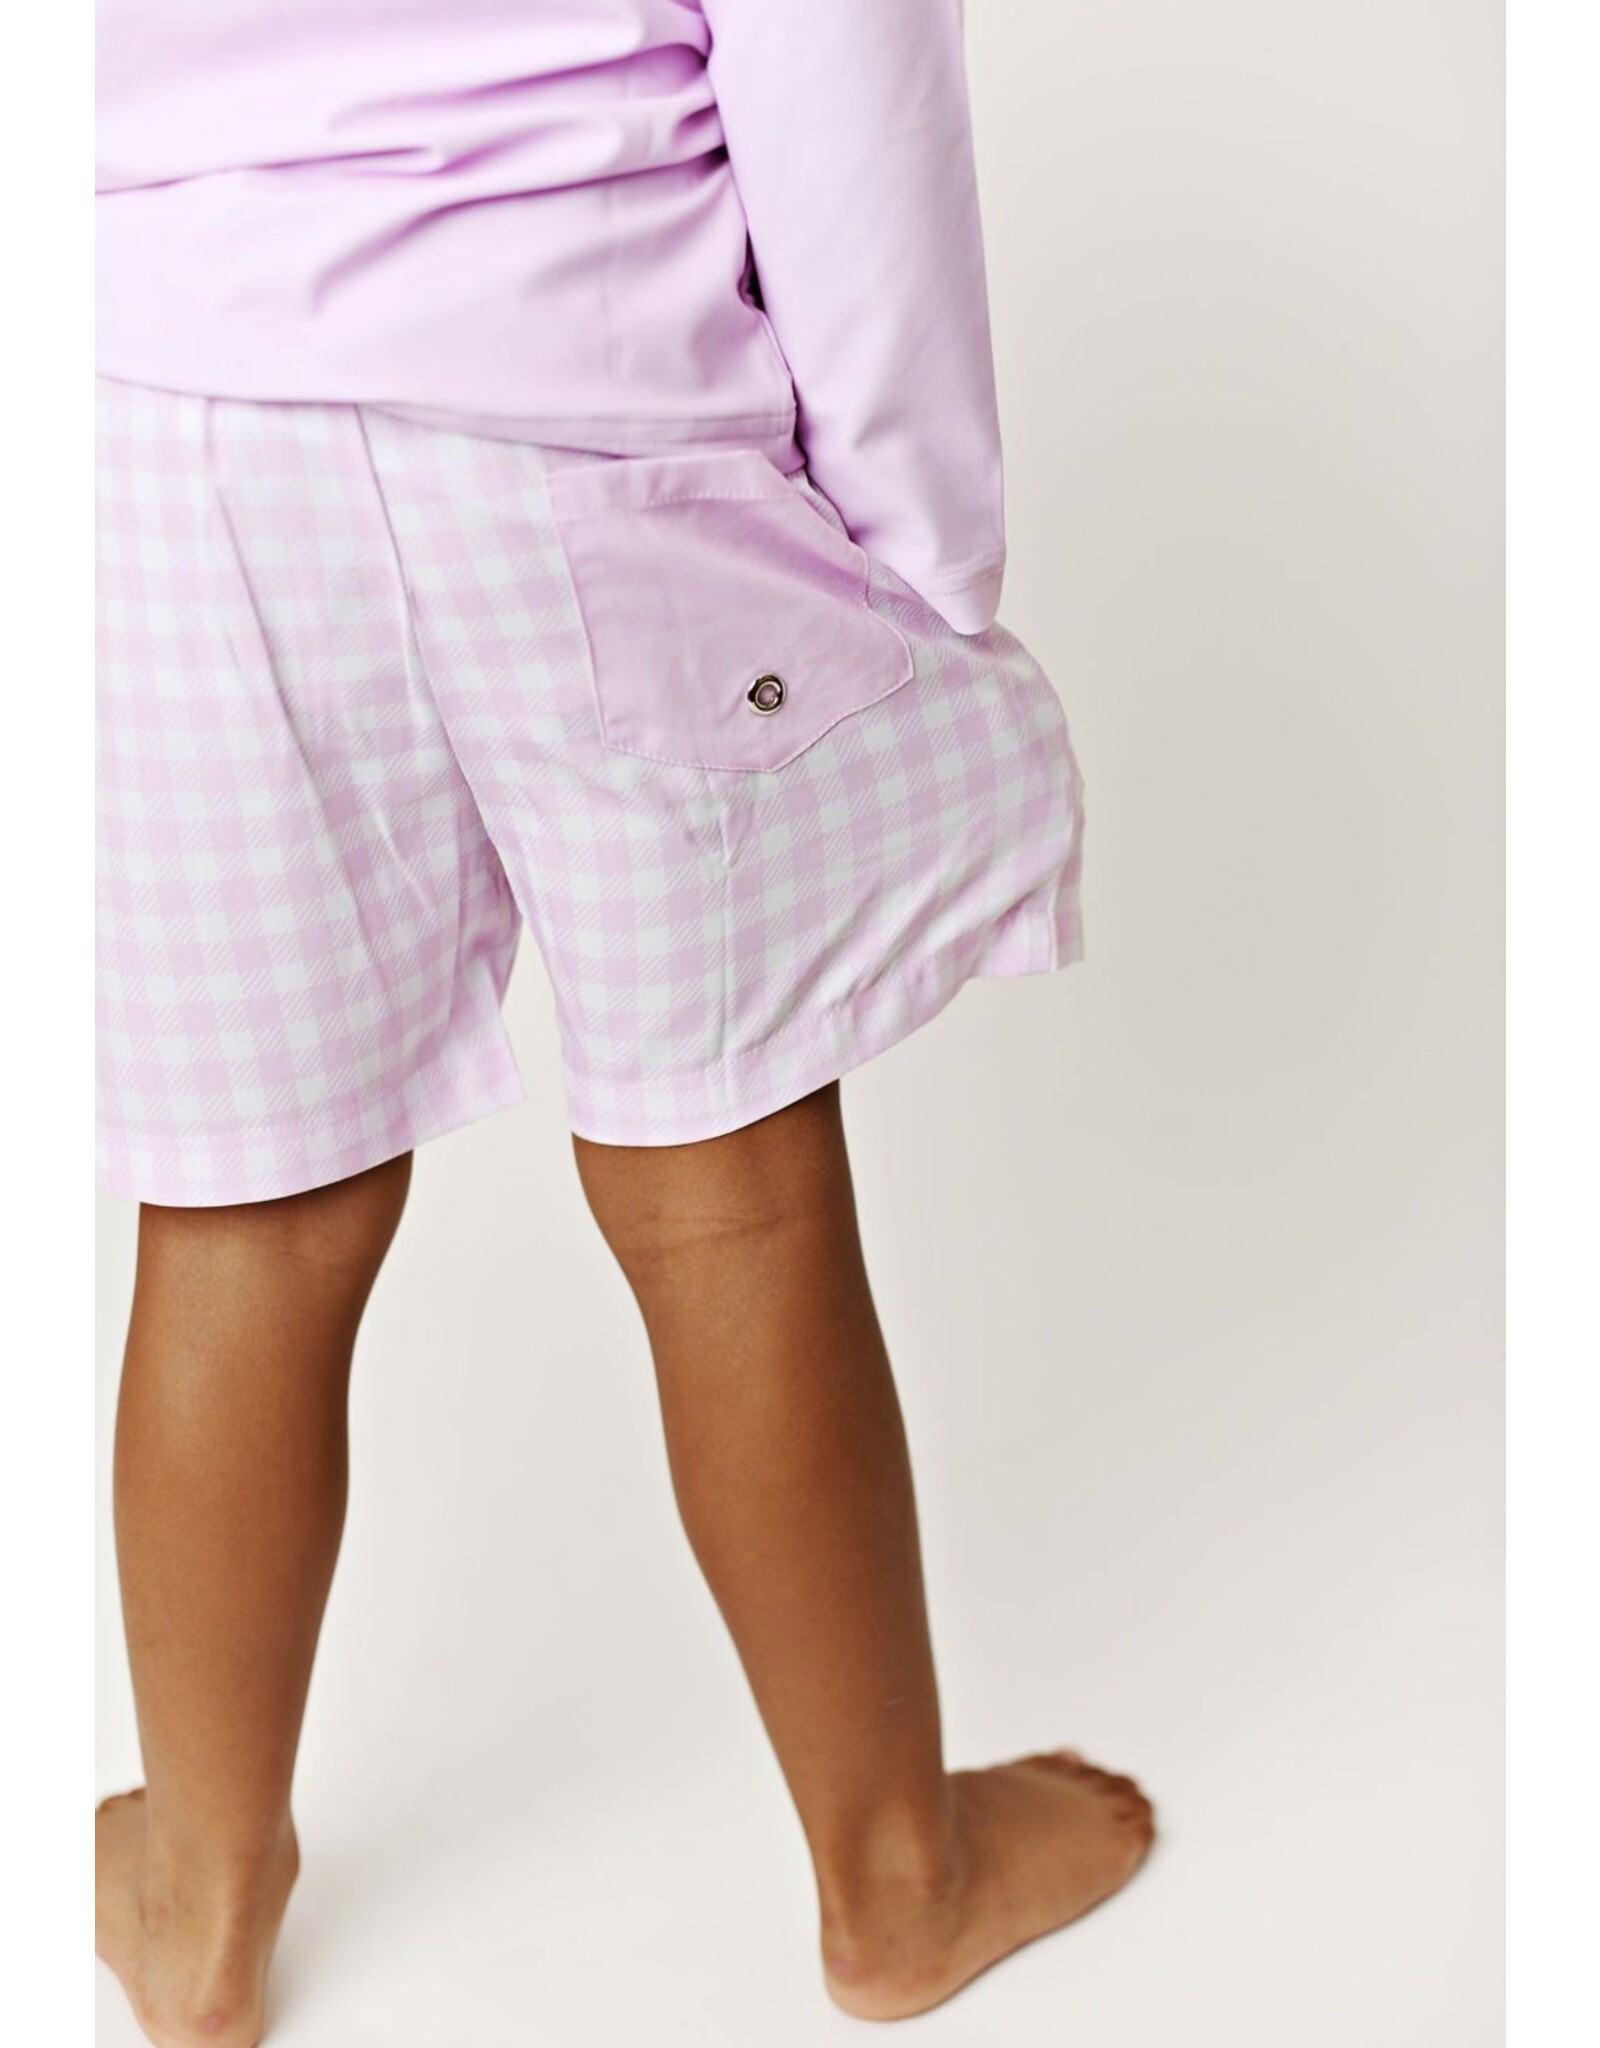 Swoon Baby Swoon Baby- Pool Days Pink Gingham Swim Short